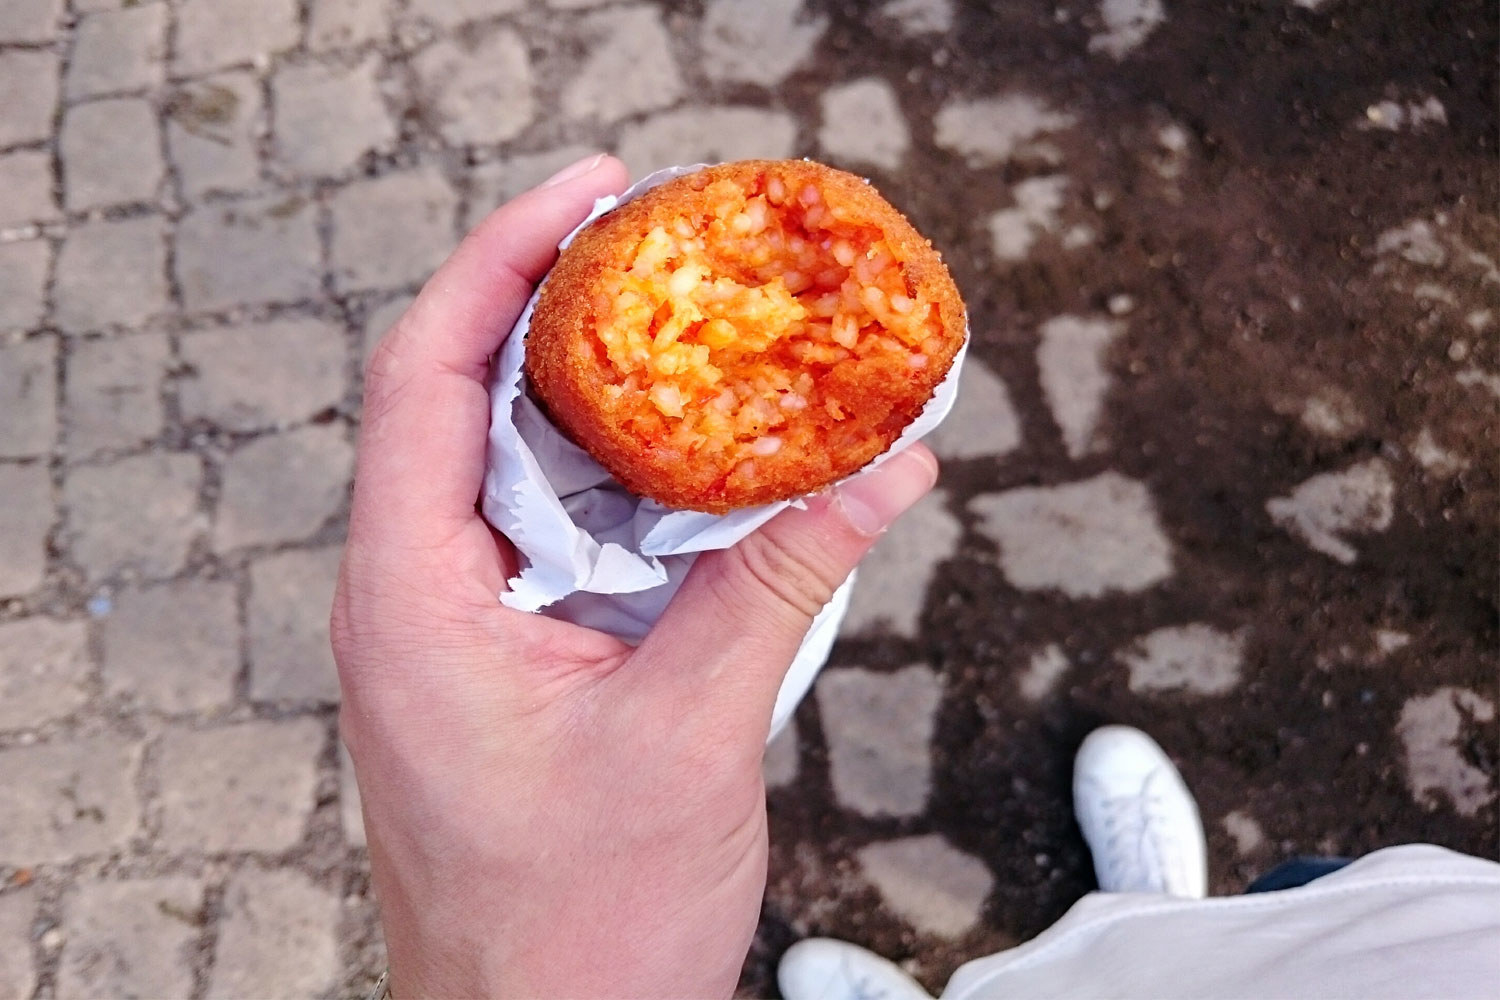 A hand holding a suppli filled with tomato risotto